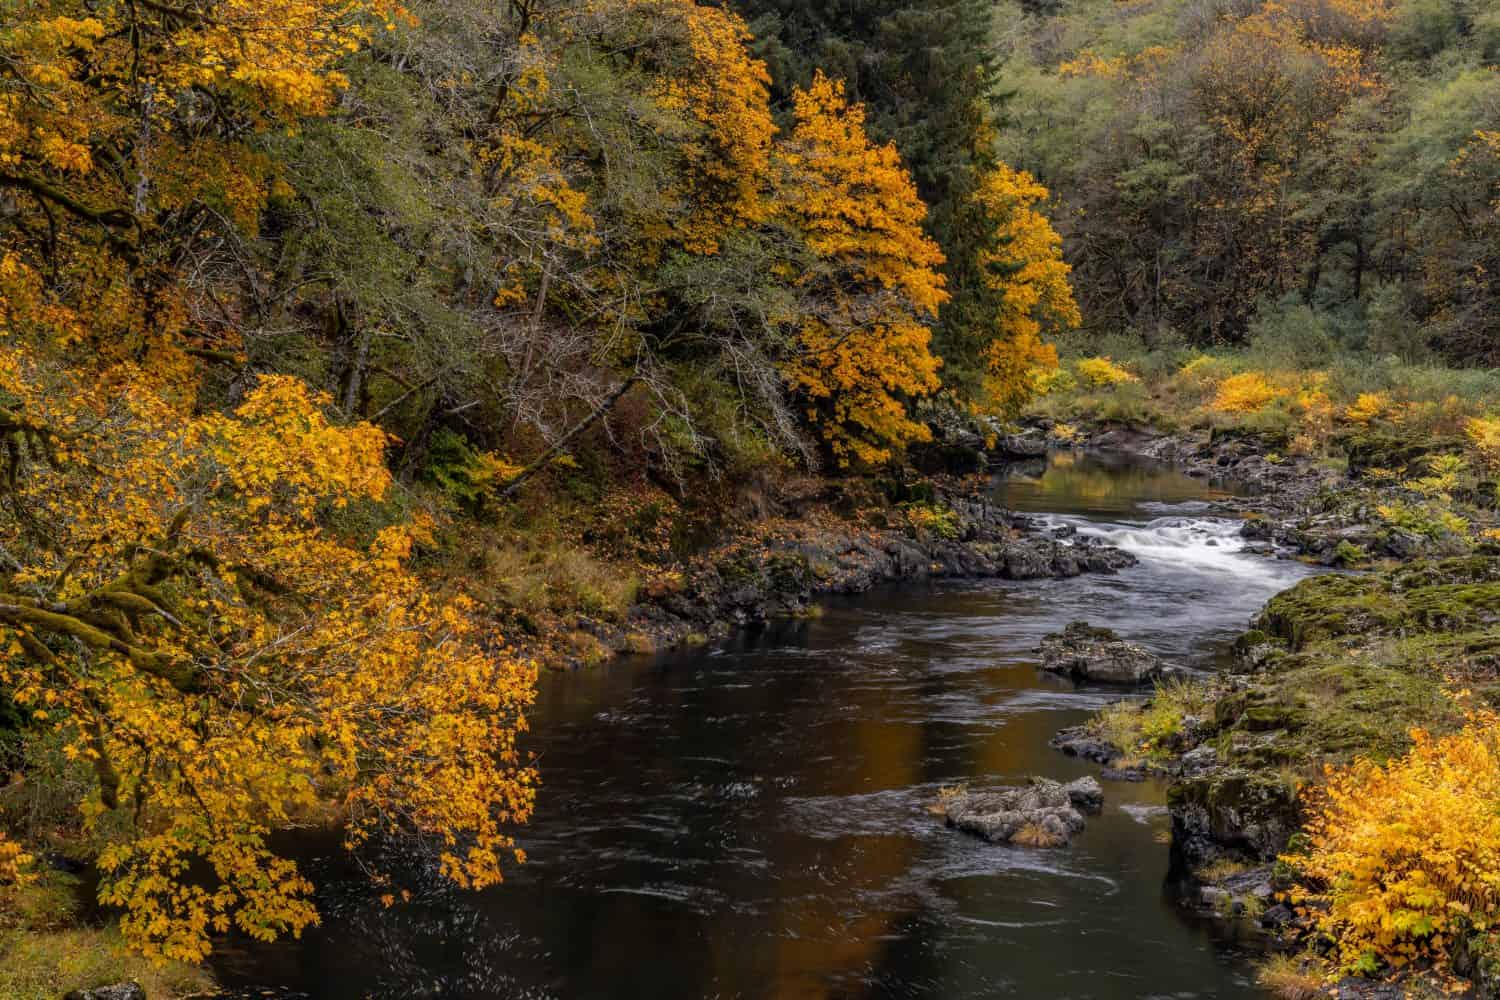 Fall color along the Nehalem River in the Tillamook State Forest, Oregon, USA